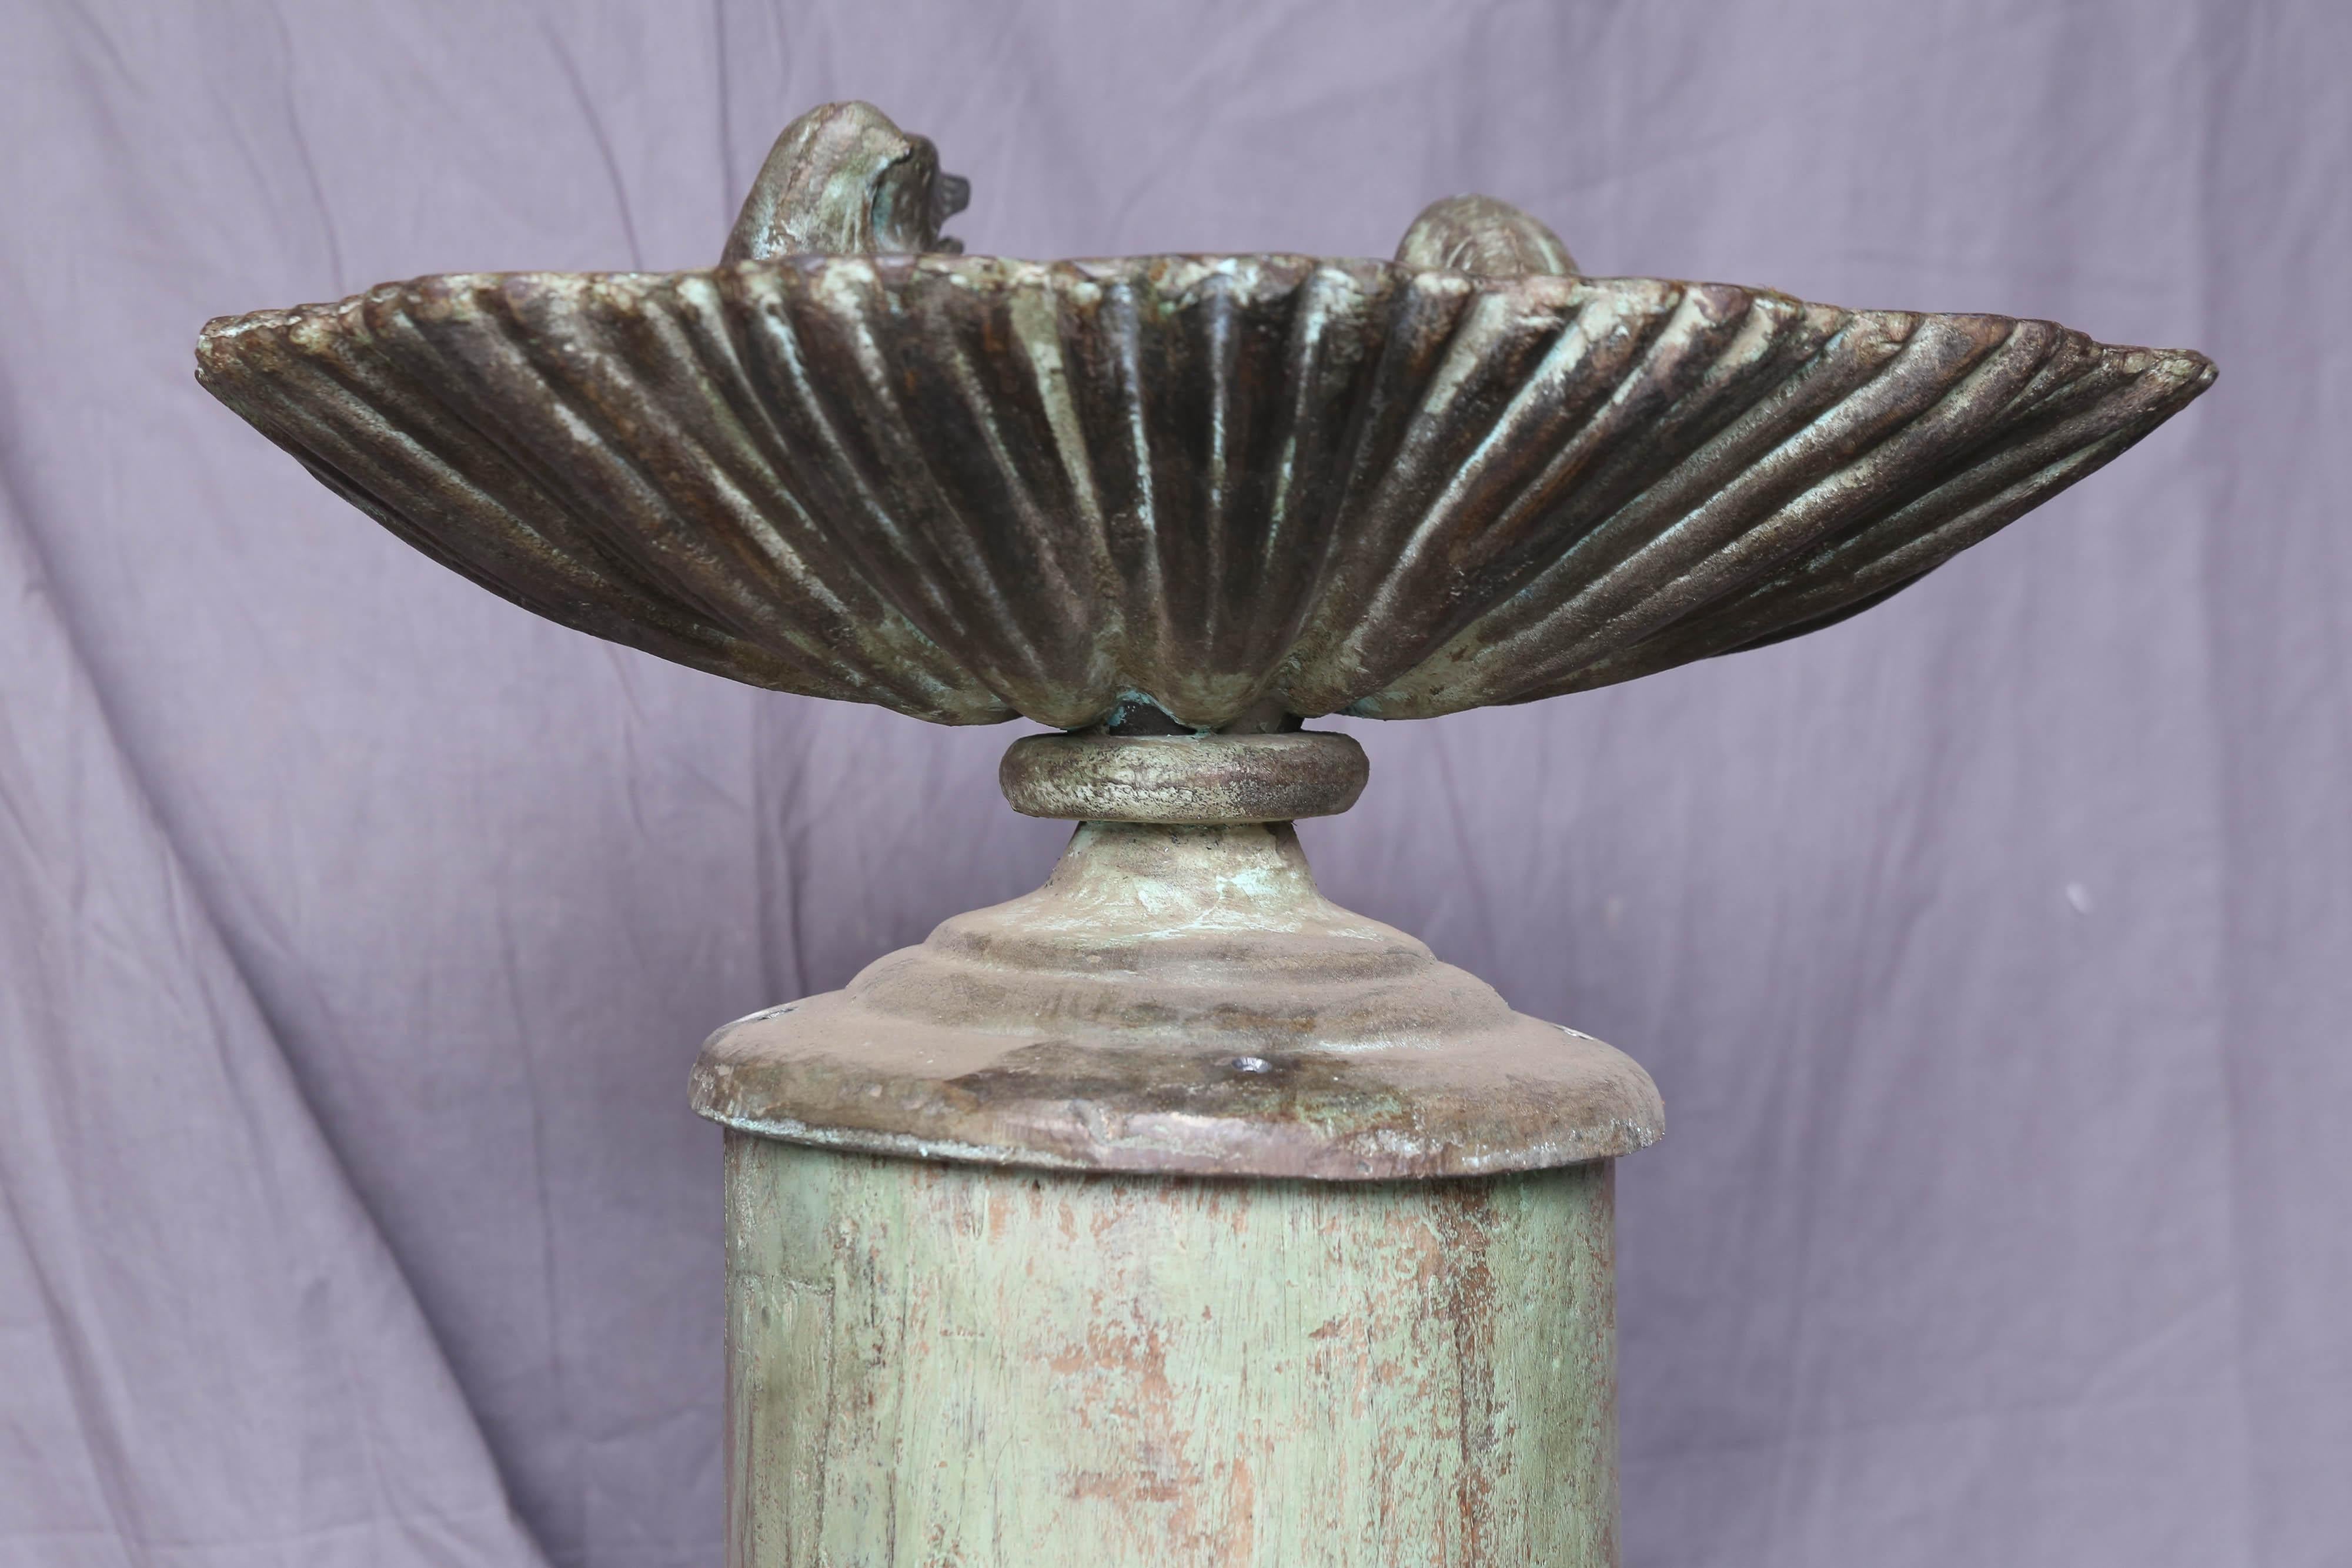 Asian Cute Cast Iron Bird Bath from the Back Yard Garden of a Colonial Home